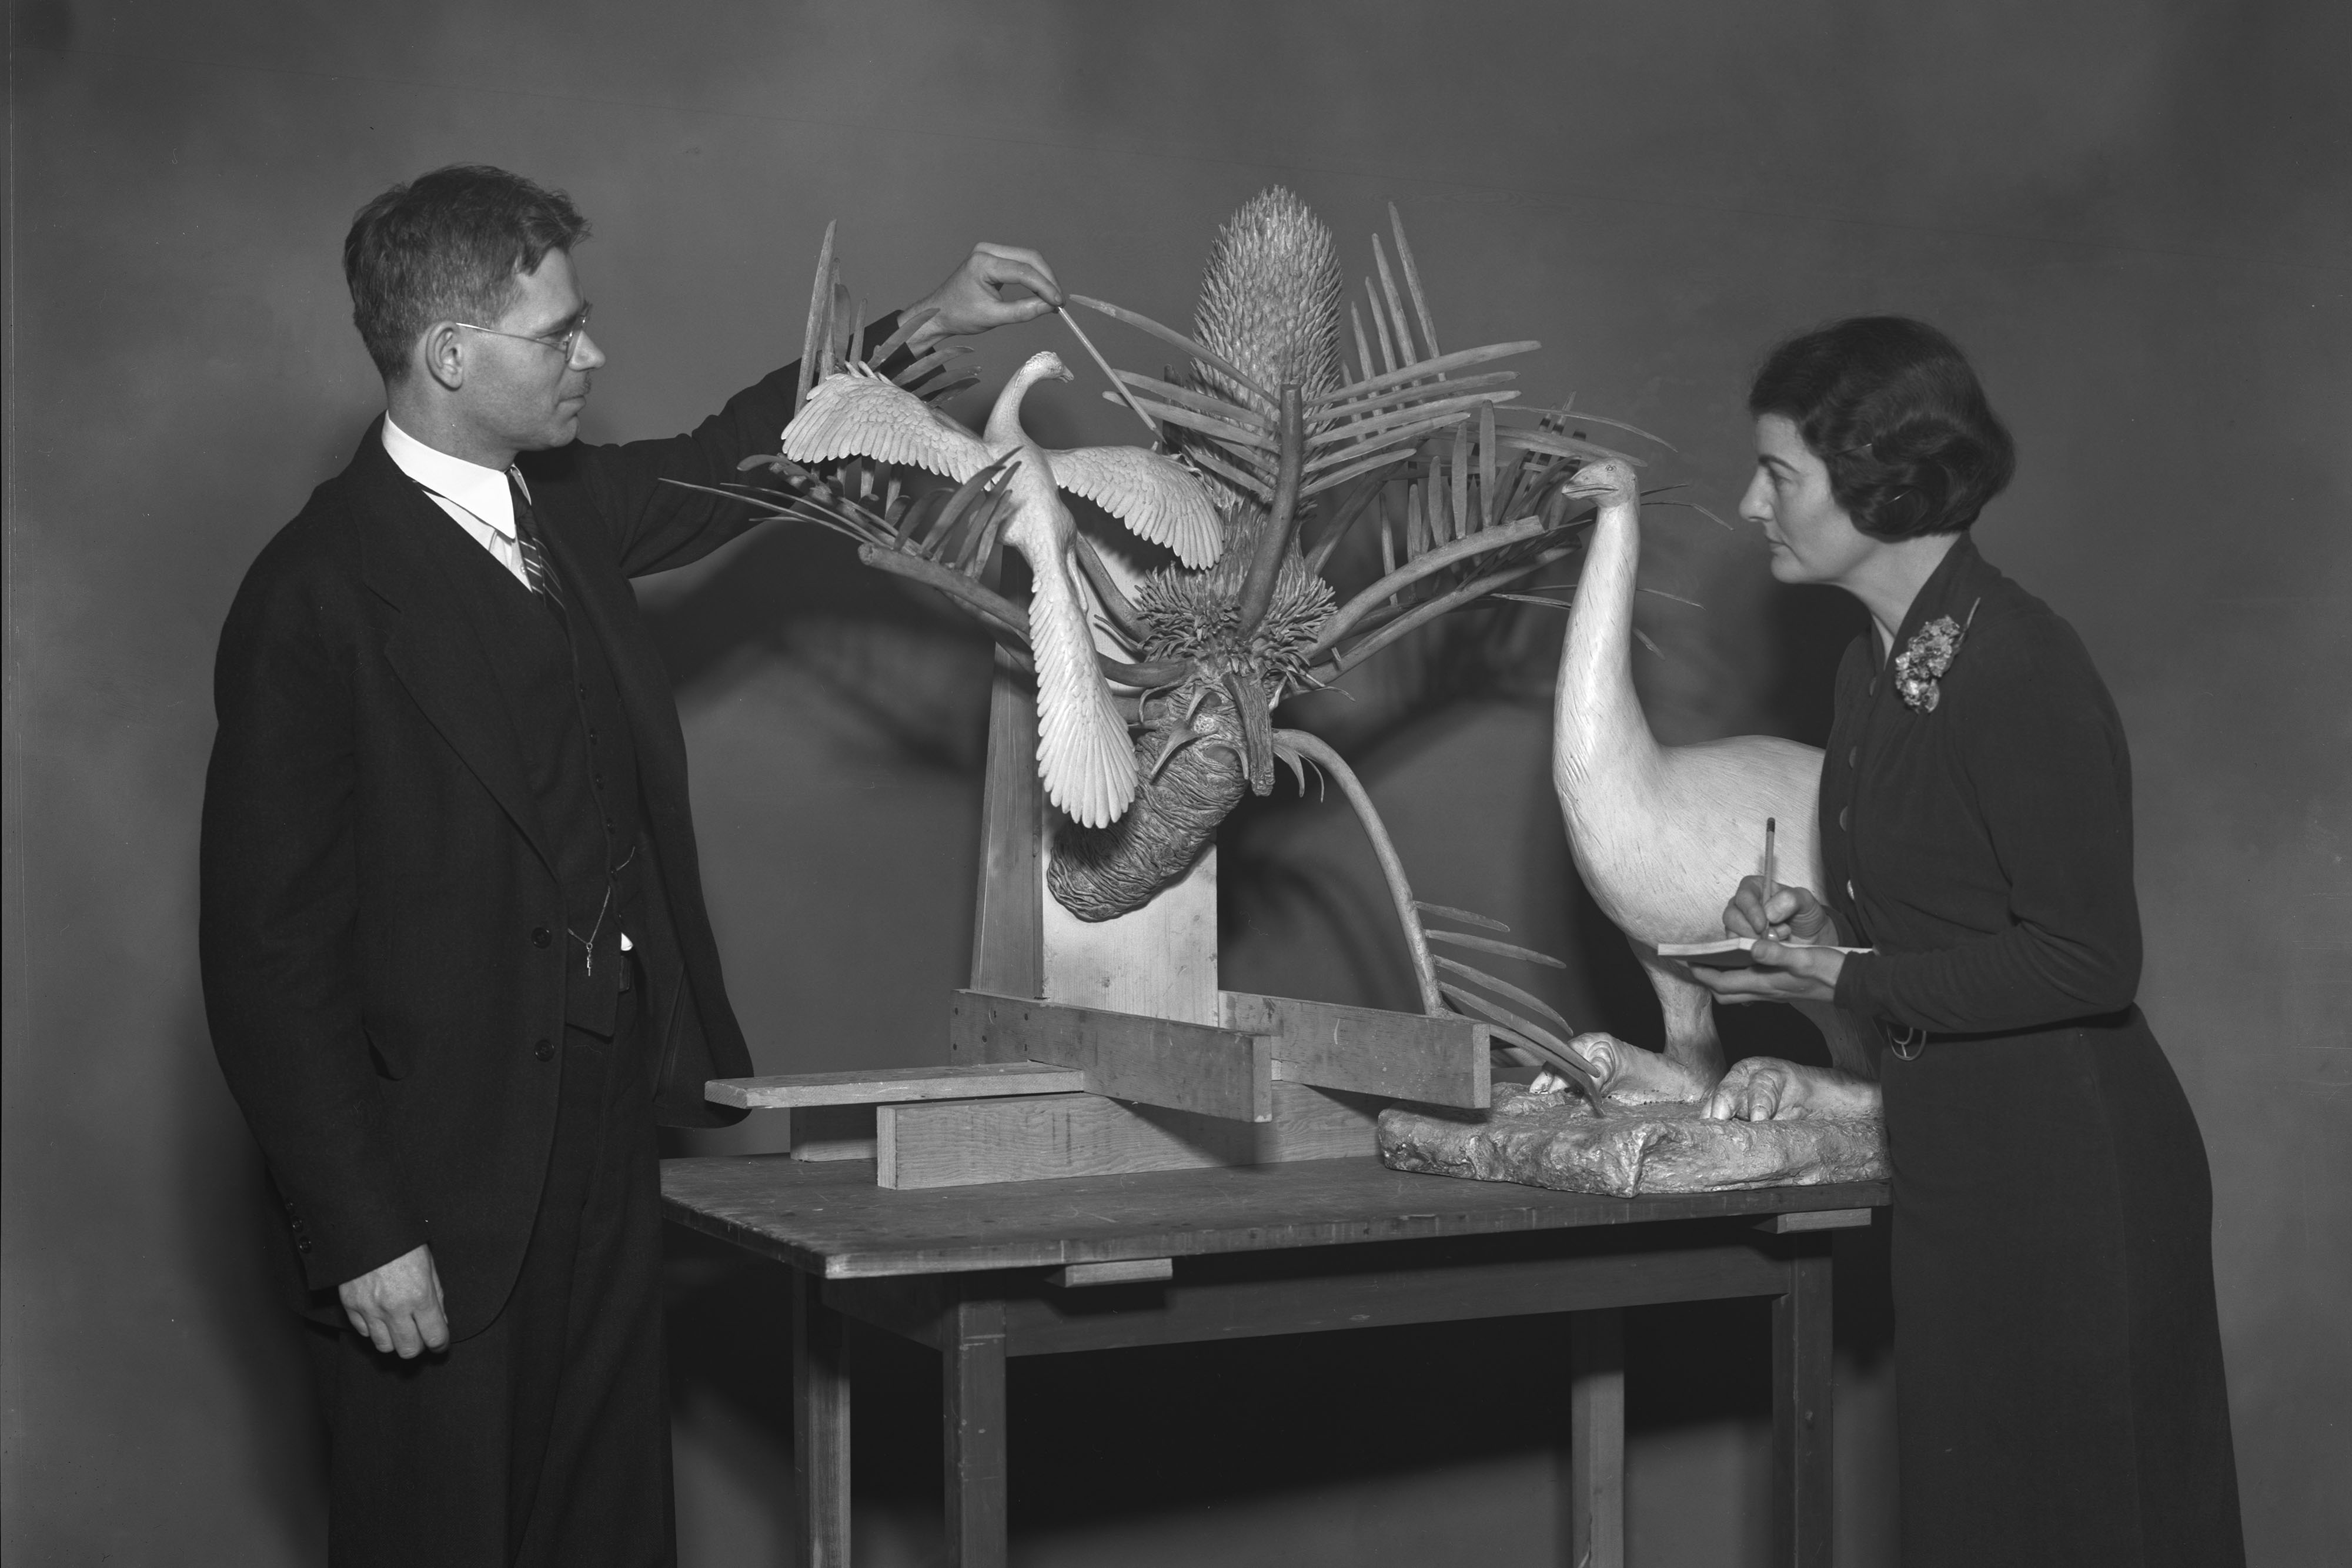 In a black-and-white photo, a man and a woman look at a model of a bird perched on a tropical-looking plant. The man uses a pencil to point at a detail, while the women writes something on a notepad. Their clothing reflects the time period of late 1930s.